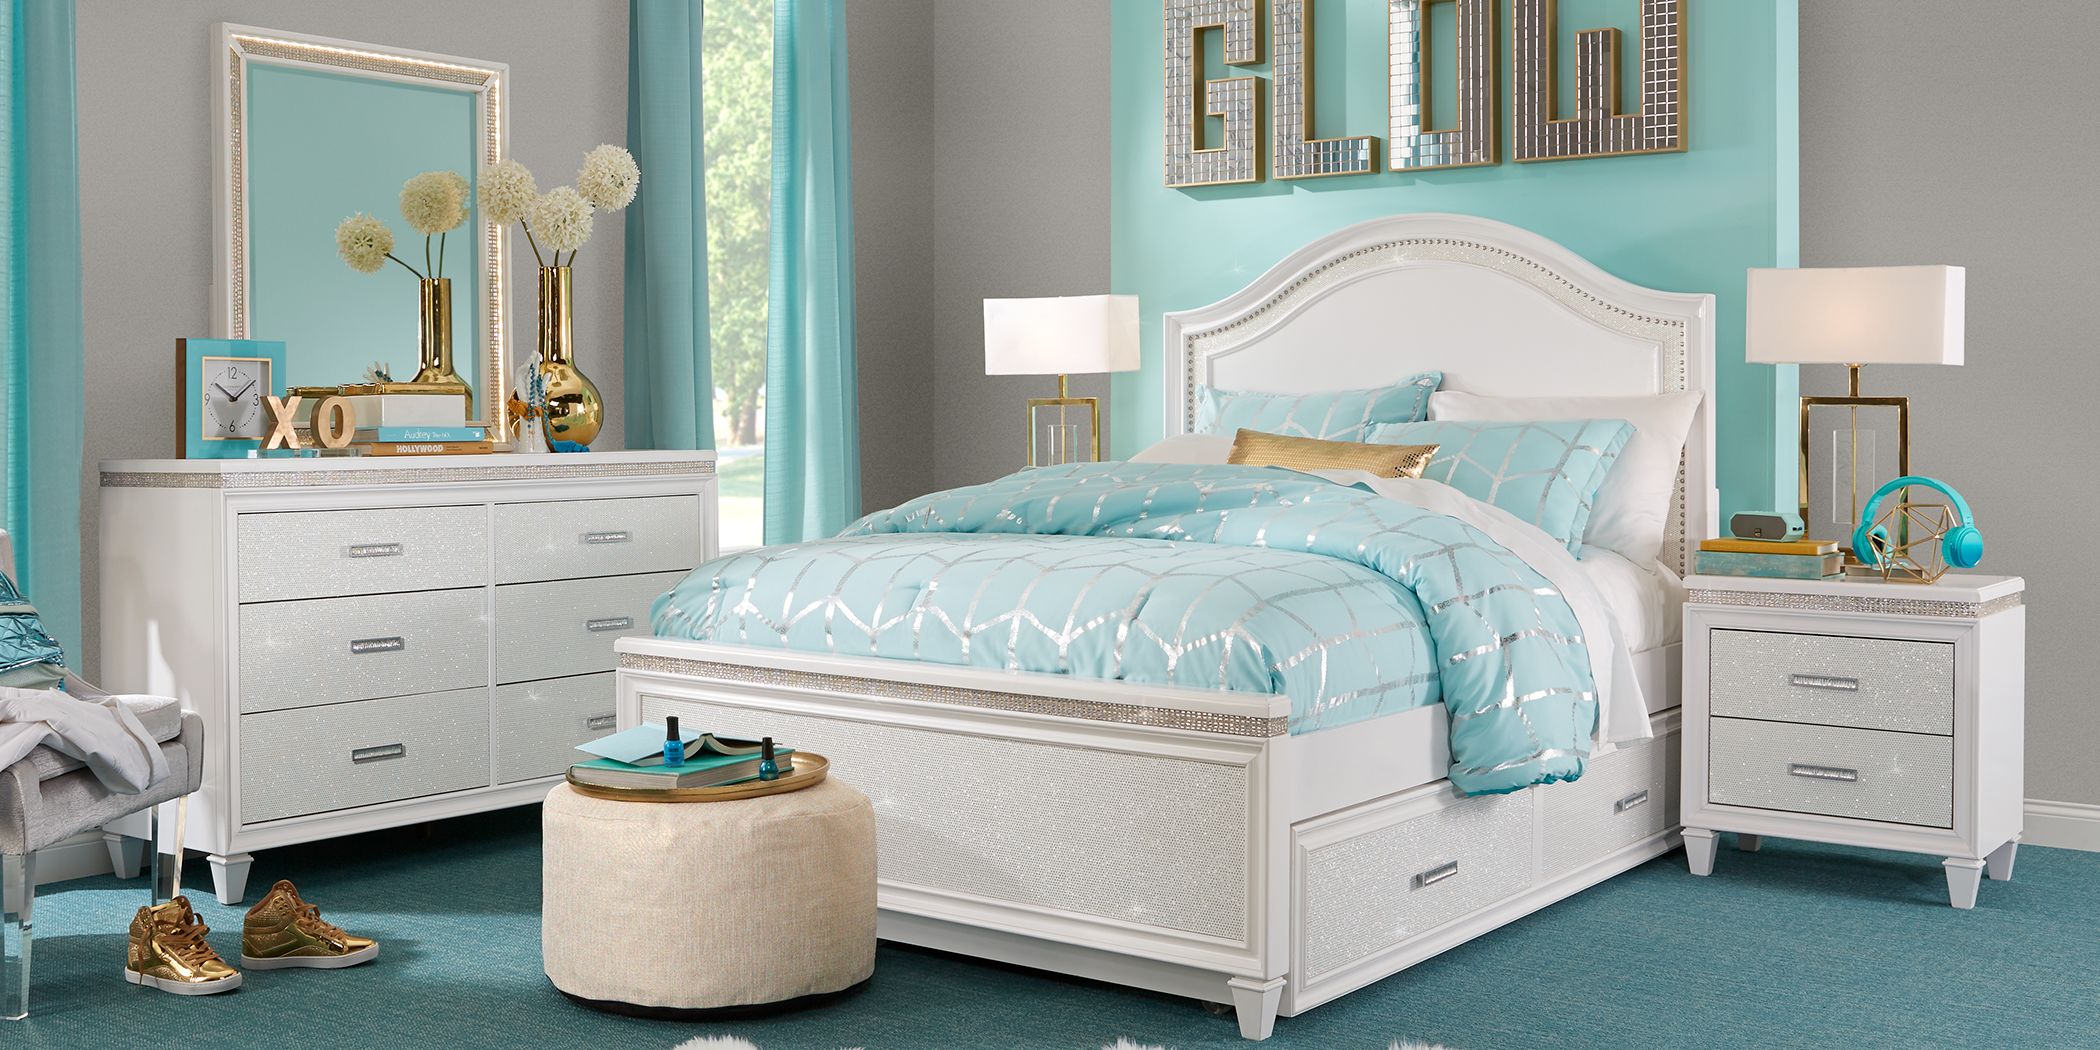 Girls Bedroom Sets,Home Is Where The Heart Is Clipart